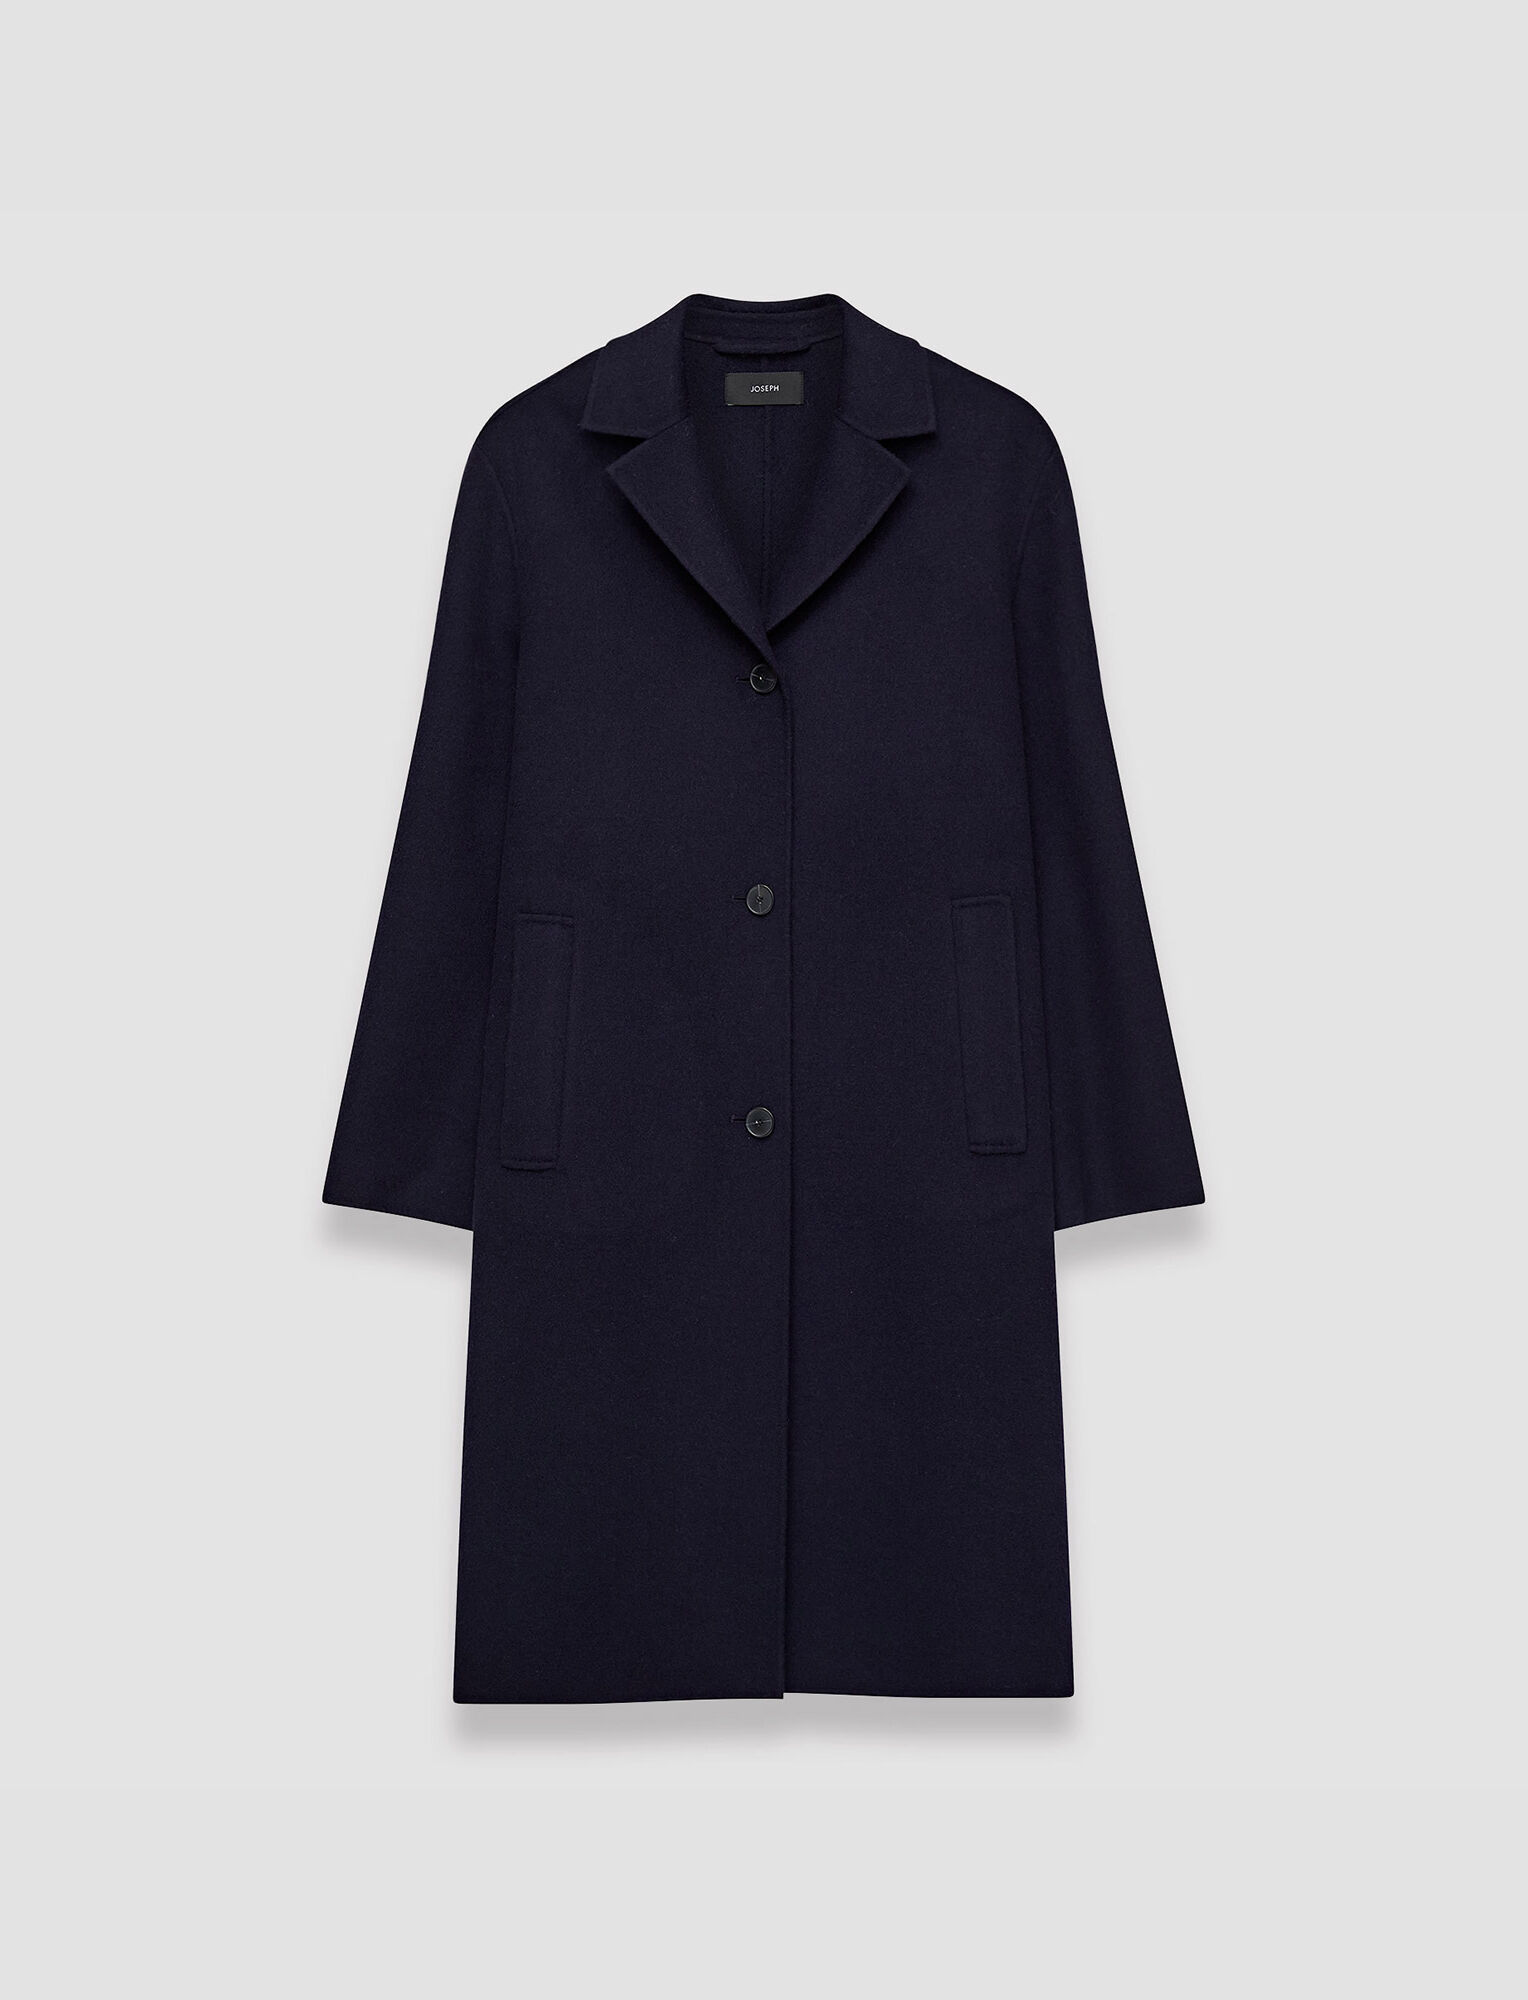 Joseph, Double Face Cashmere Caia Coat, in Navy